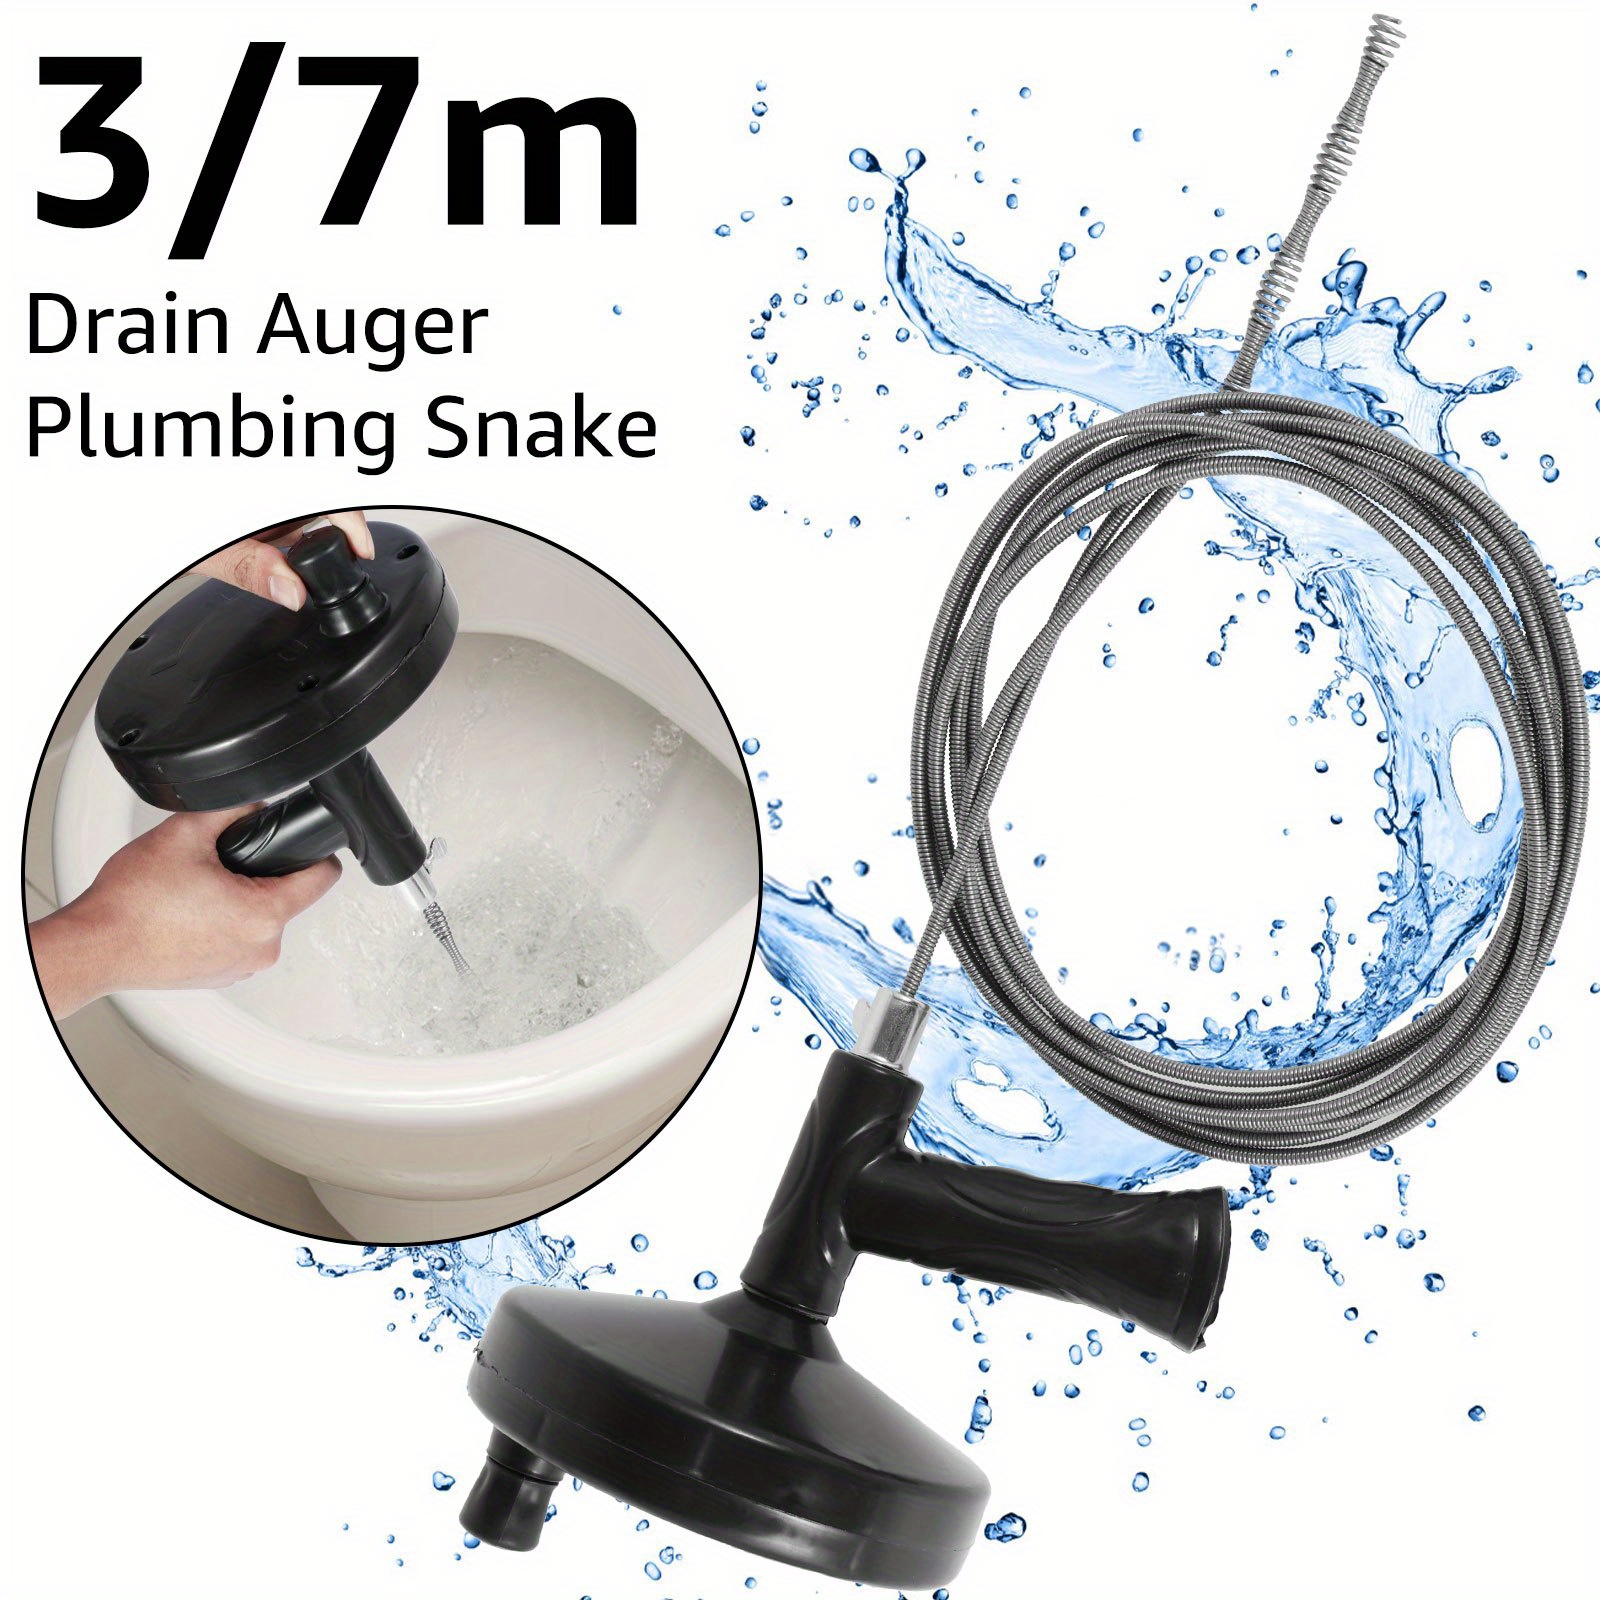 Plumbing Snake Drain Auger Manual Snake Drain Clog Remover with Non-slip  Handle for Bathroom Kitchen Bathtub Shower Sink